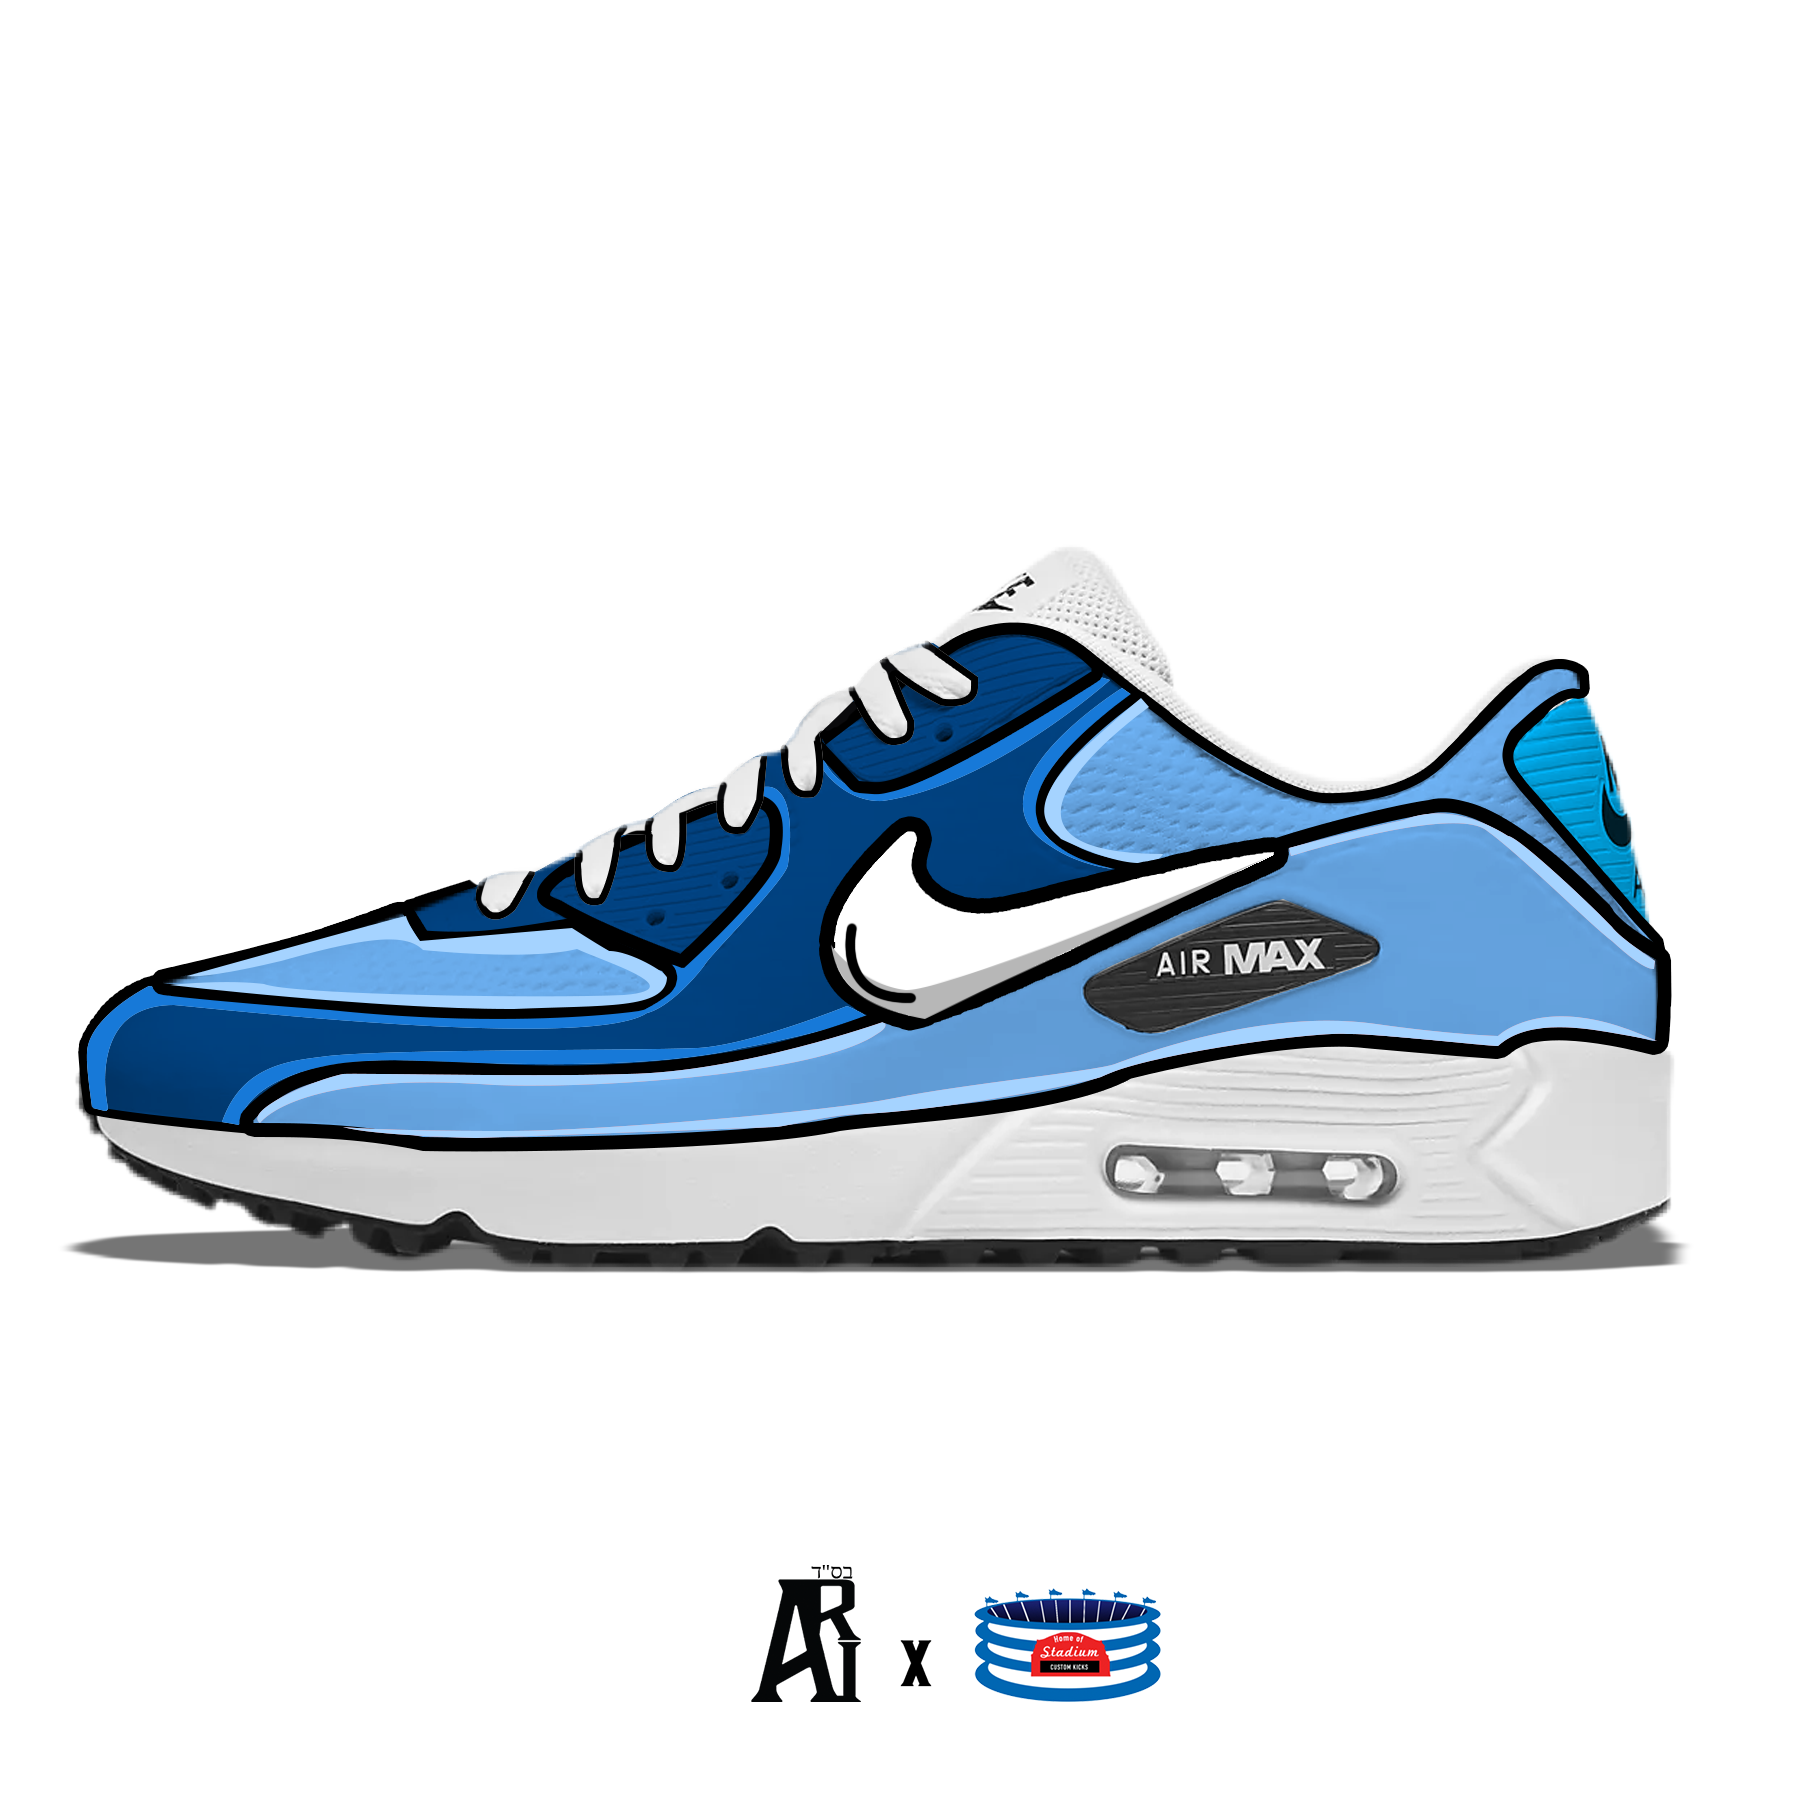 nike shoes iphone wallpaper